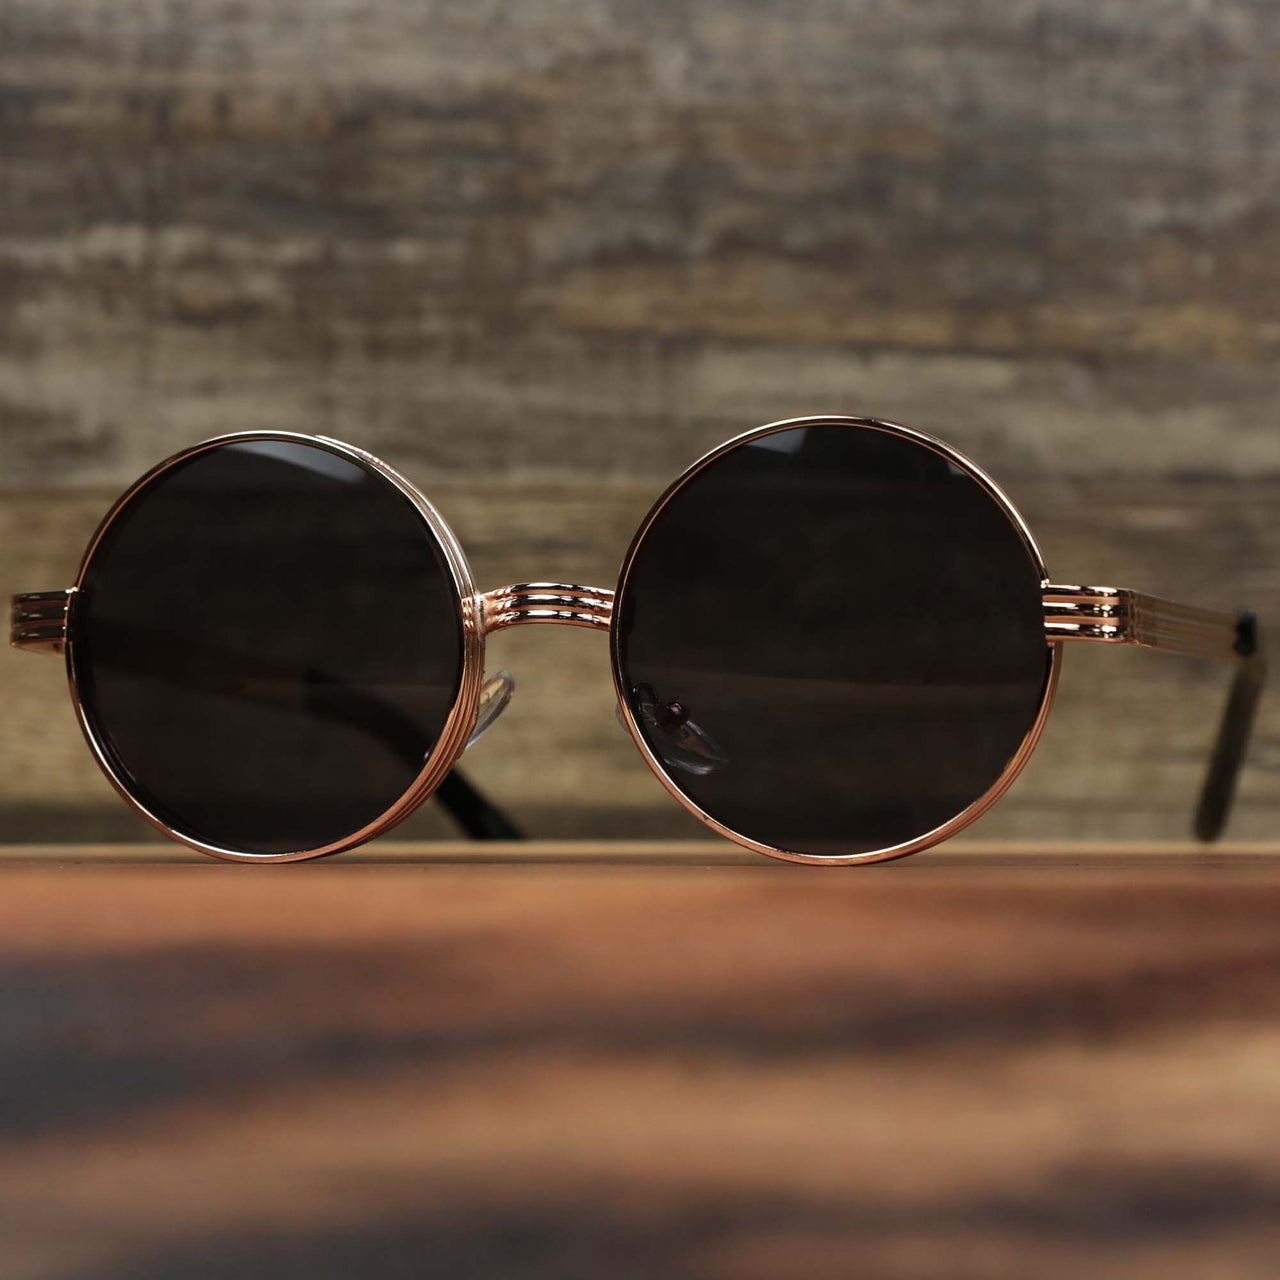 The Round 3 Row Frame Black Lens Sunglasses with Rose Gold Frame